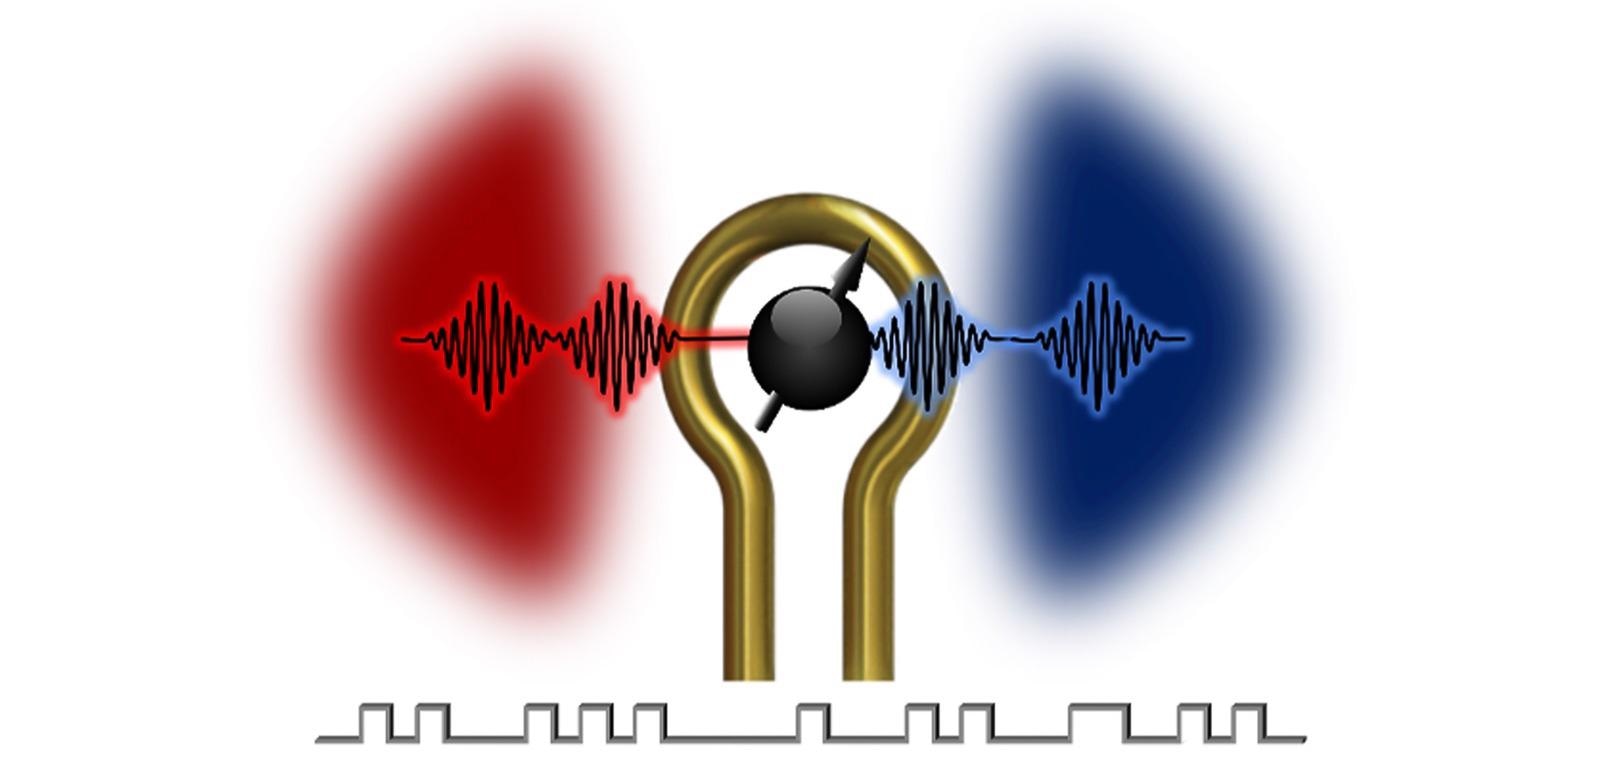 New Approach Could Improve Information Transfer in Classical, Quantum Regimes